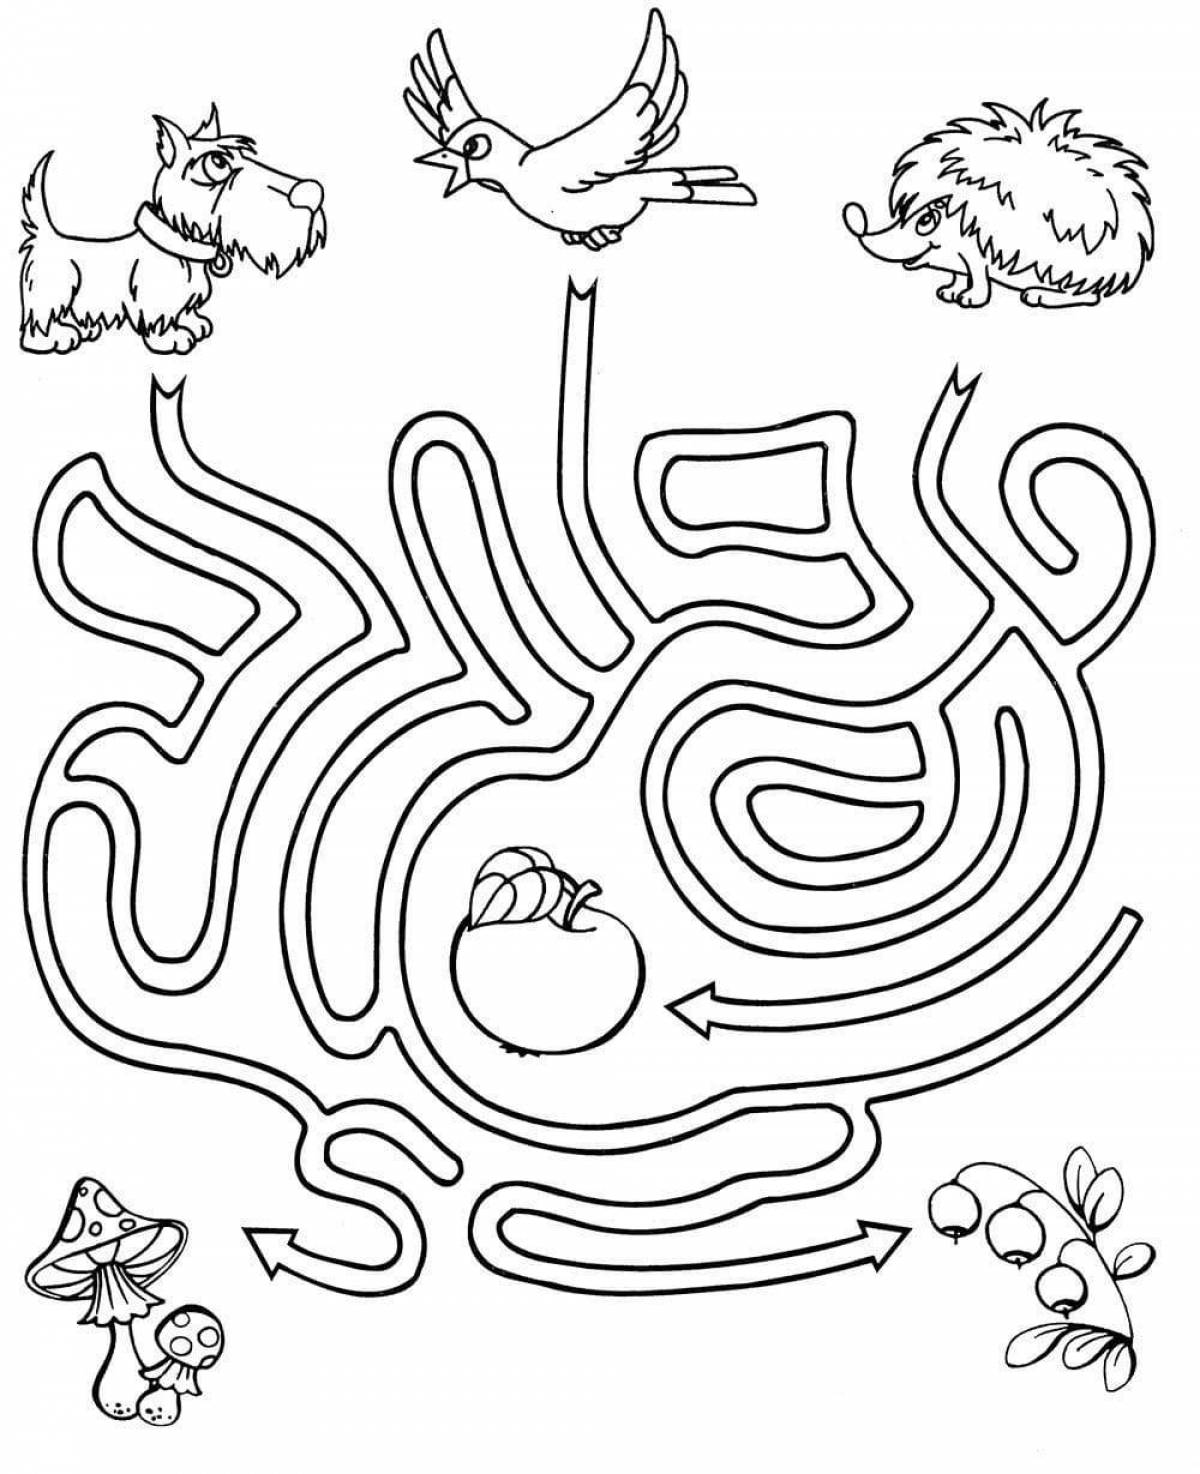 Coloring page inviting maze